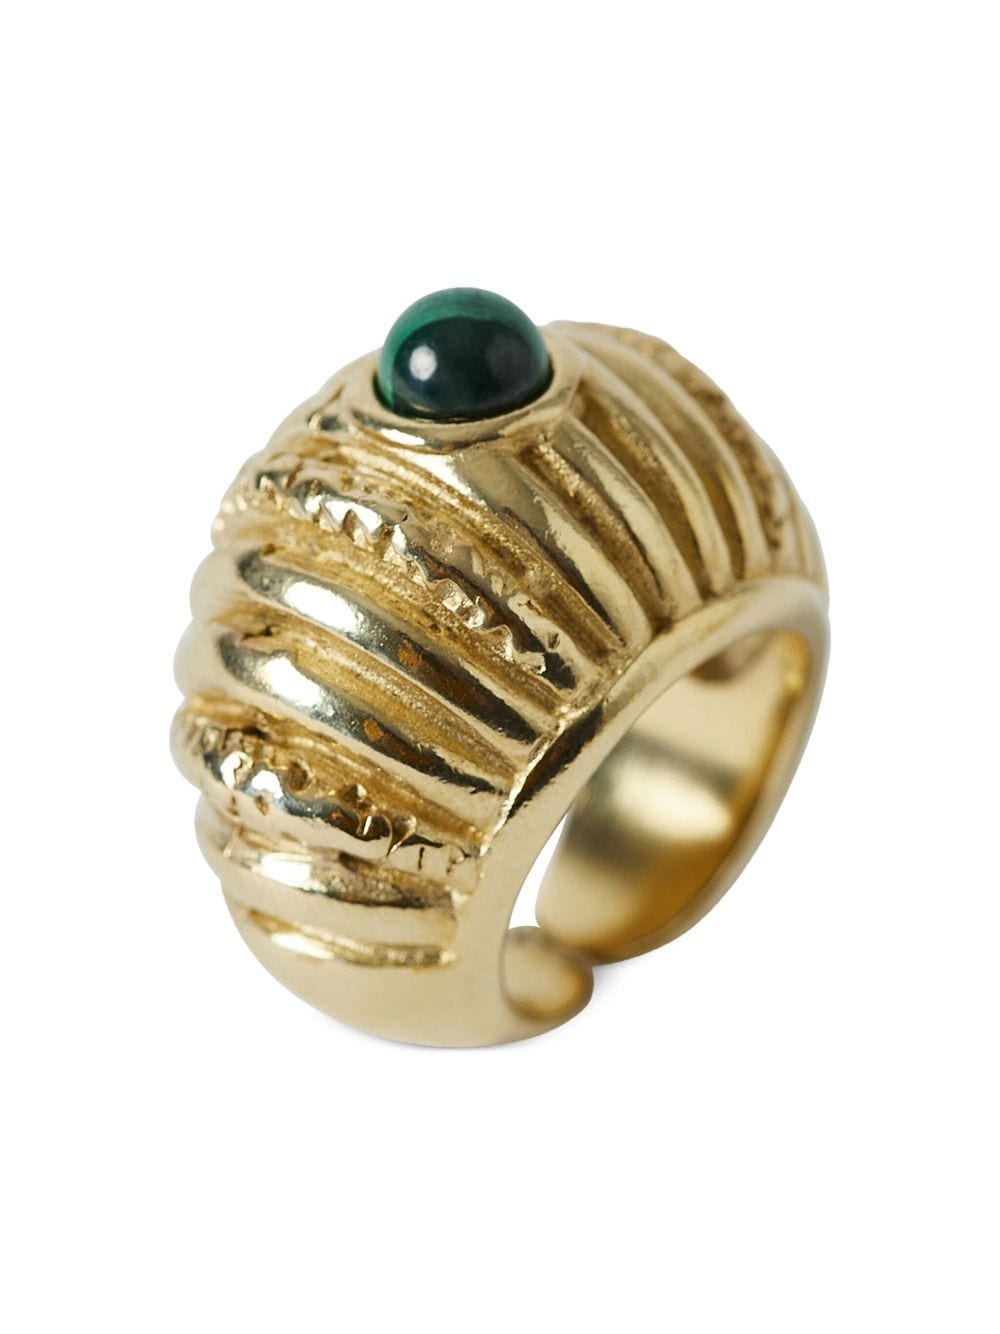 PAOLA SIGHINOLFI SMALL REEF TEXTURED RING